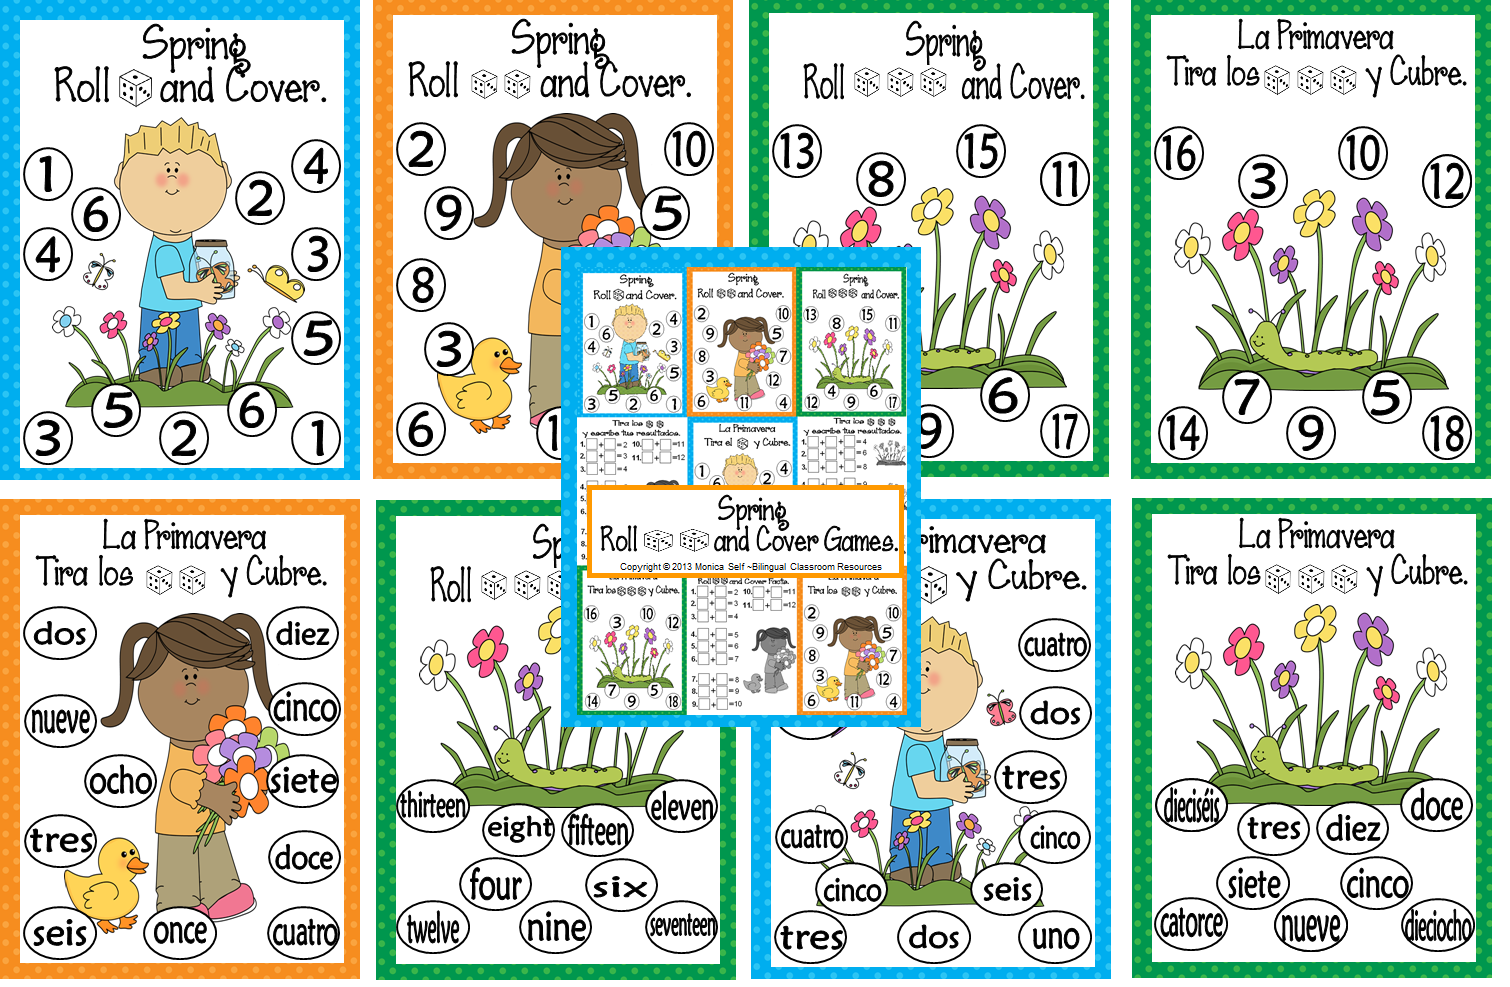 http://www.teacherspayteachers.com/Product/Spring-Roll-and-Cover-Games-611910